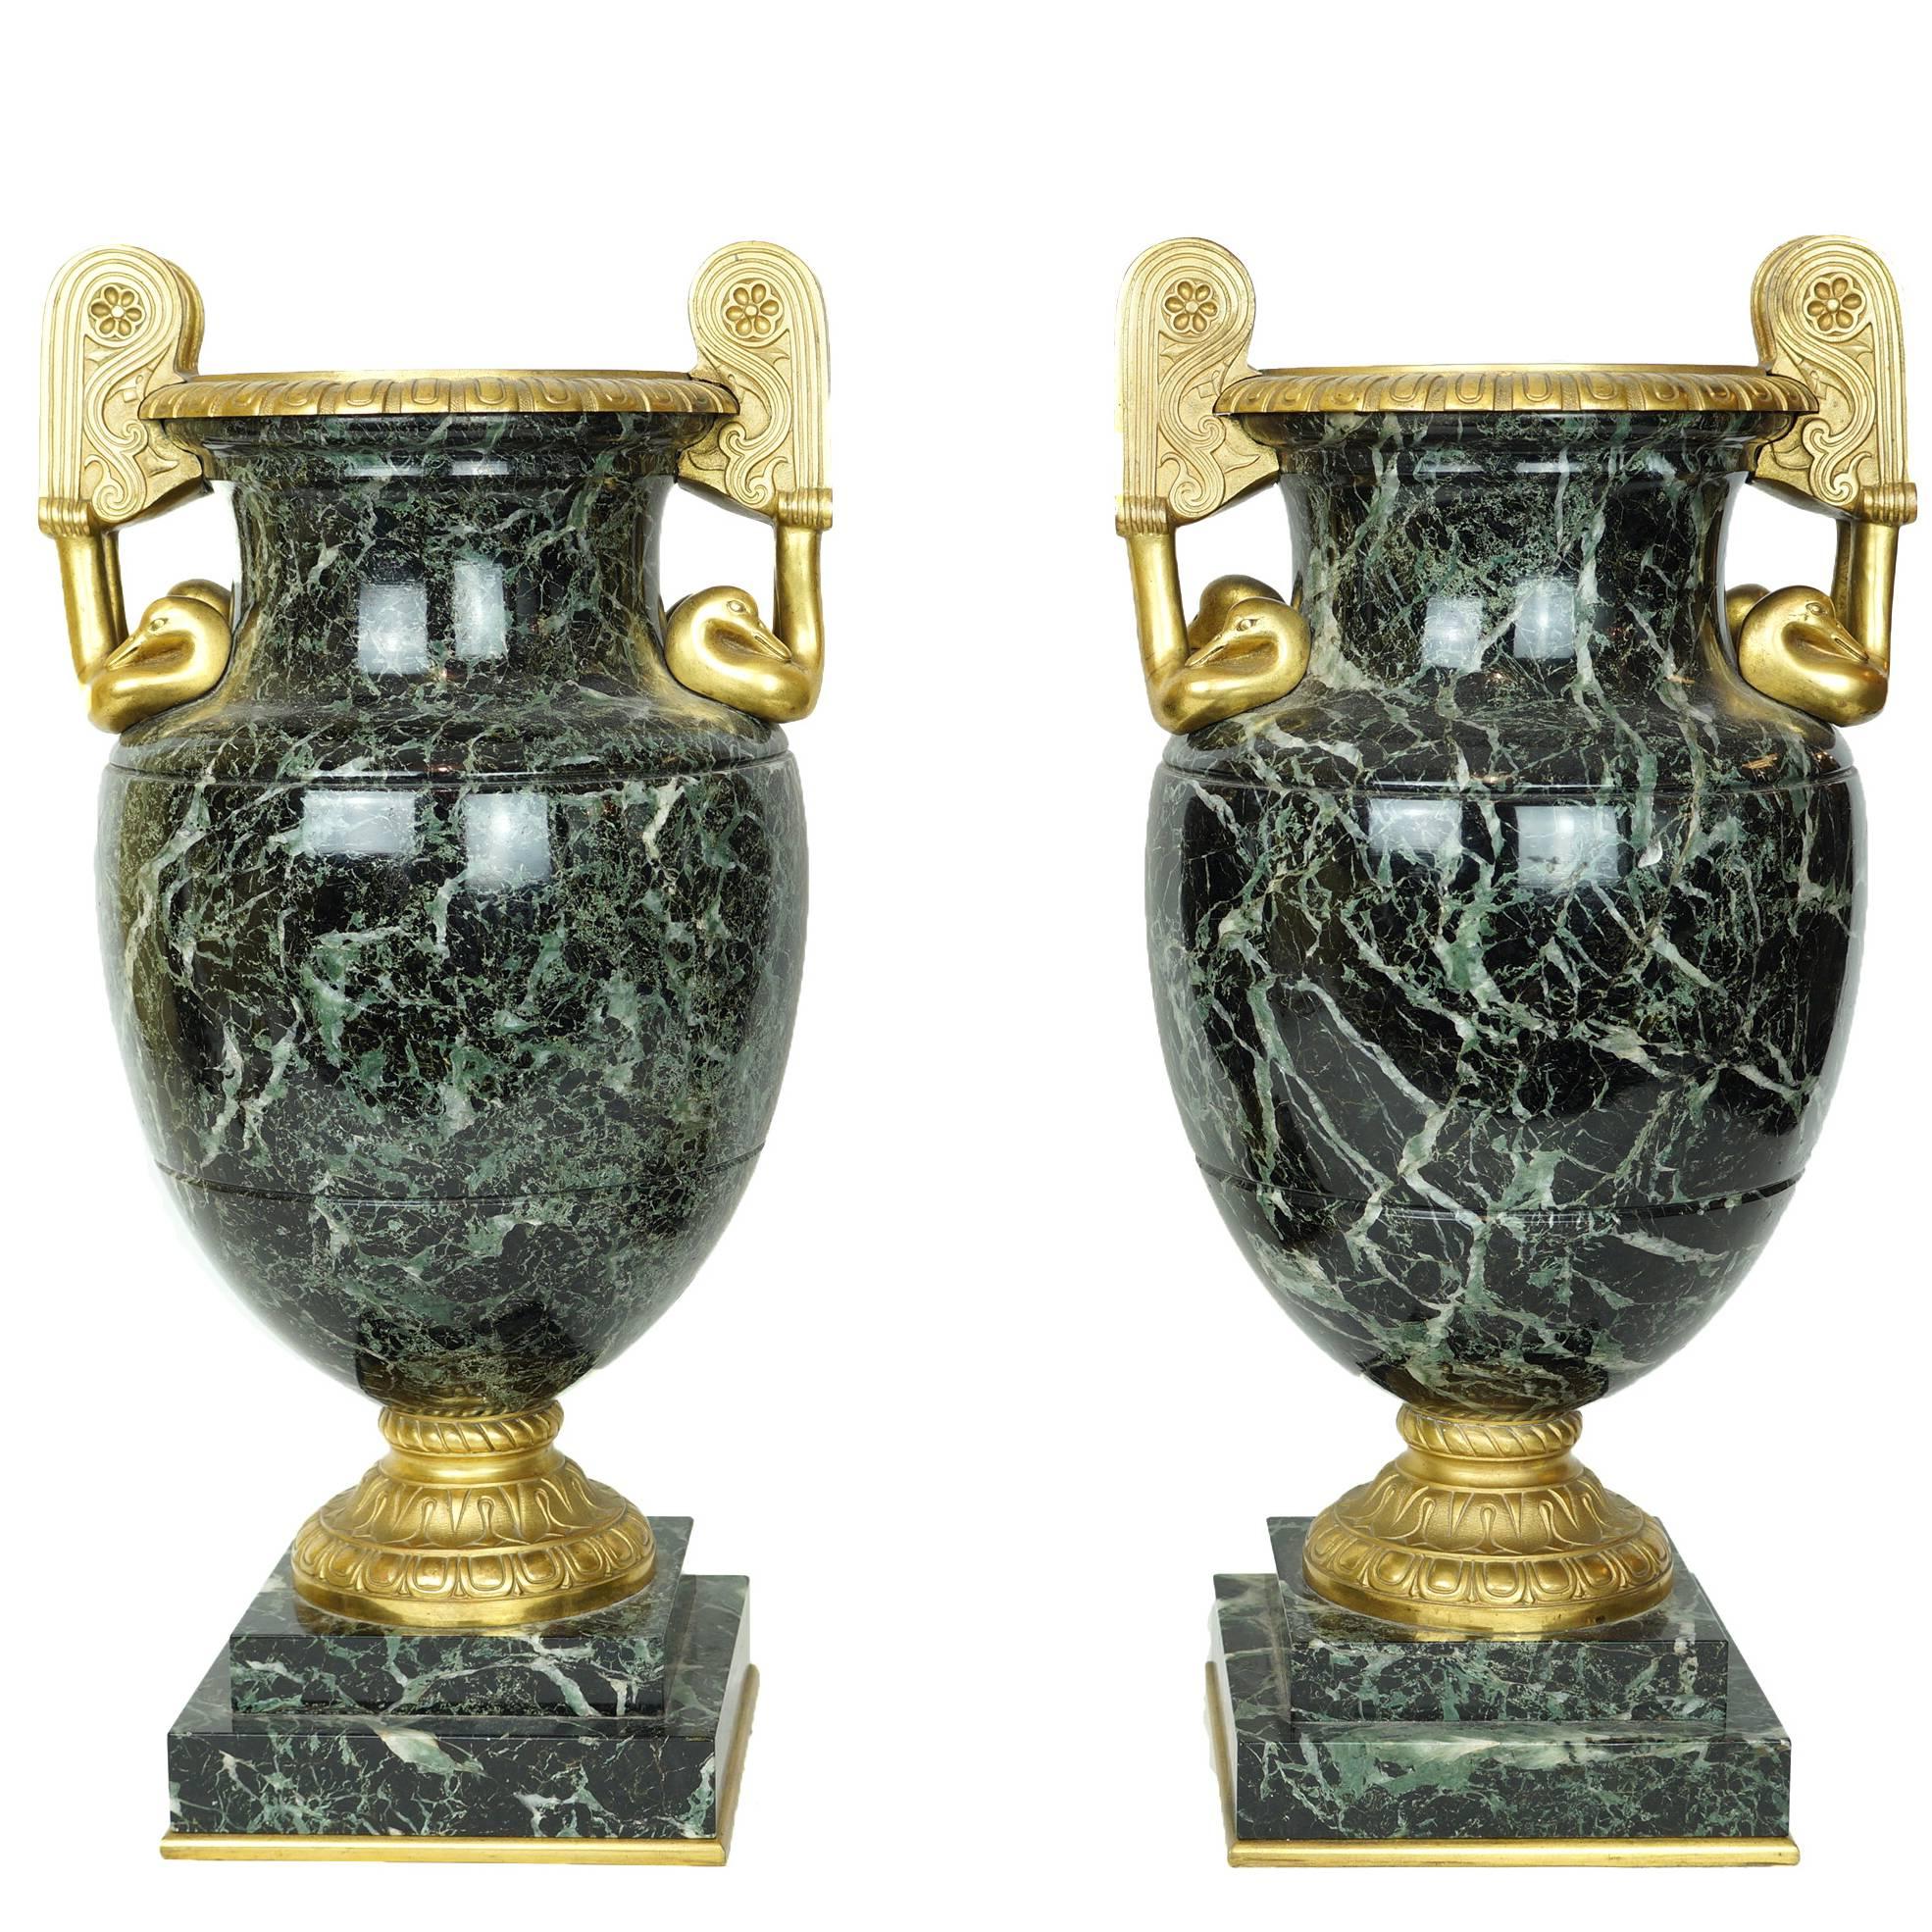 Pair of Neoclassical Marble and Bronze Urns with Bronze Swan Handles